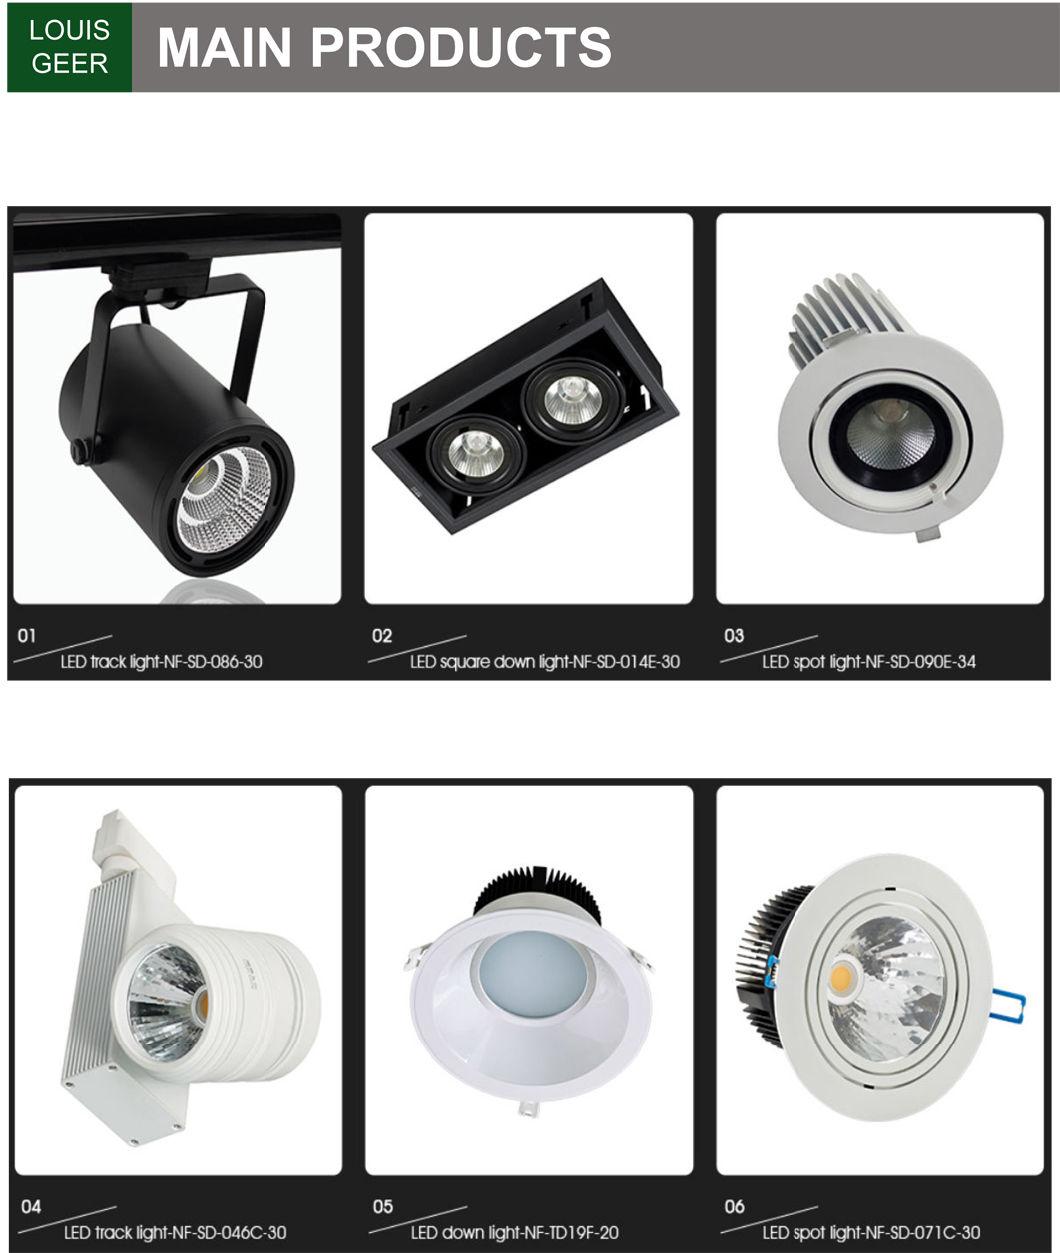 High Power 360 Degree Adjustable 15W 30W 45W 1 2 3 Heads Adjustable Recessed COB LED Grille Light